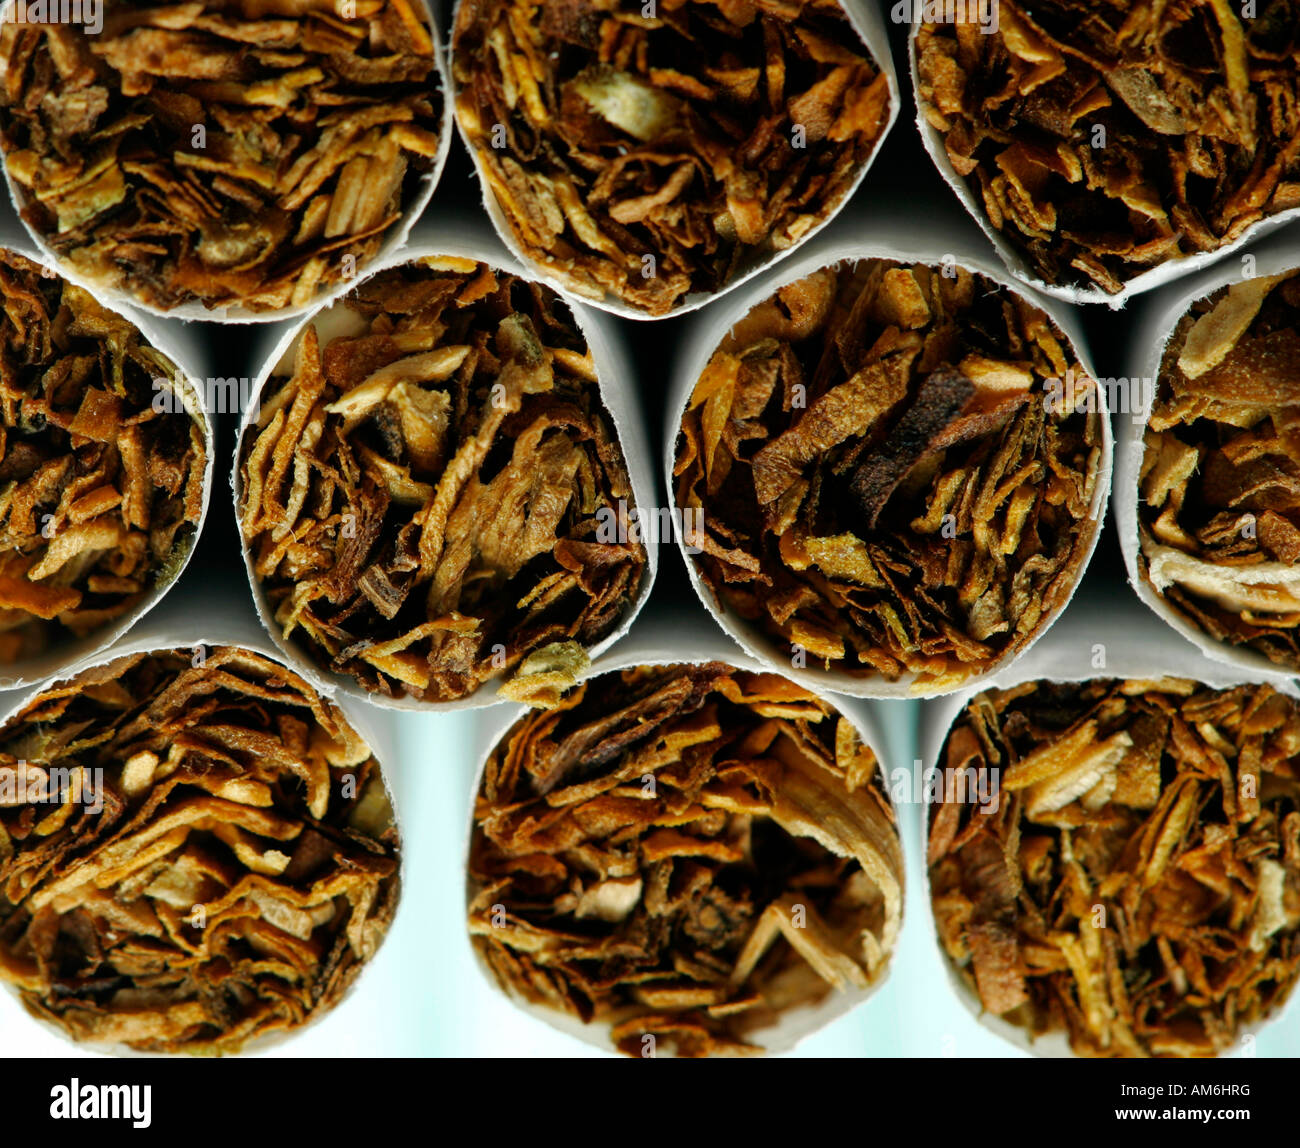 A close-up abstract view of cigarette ends Stock Photo